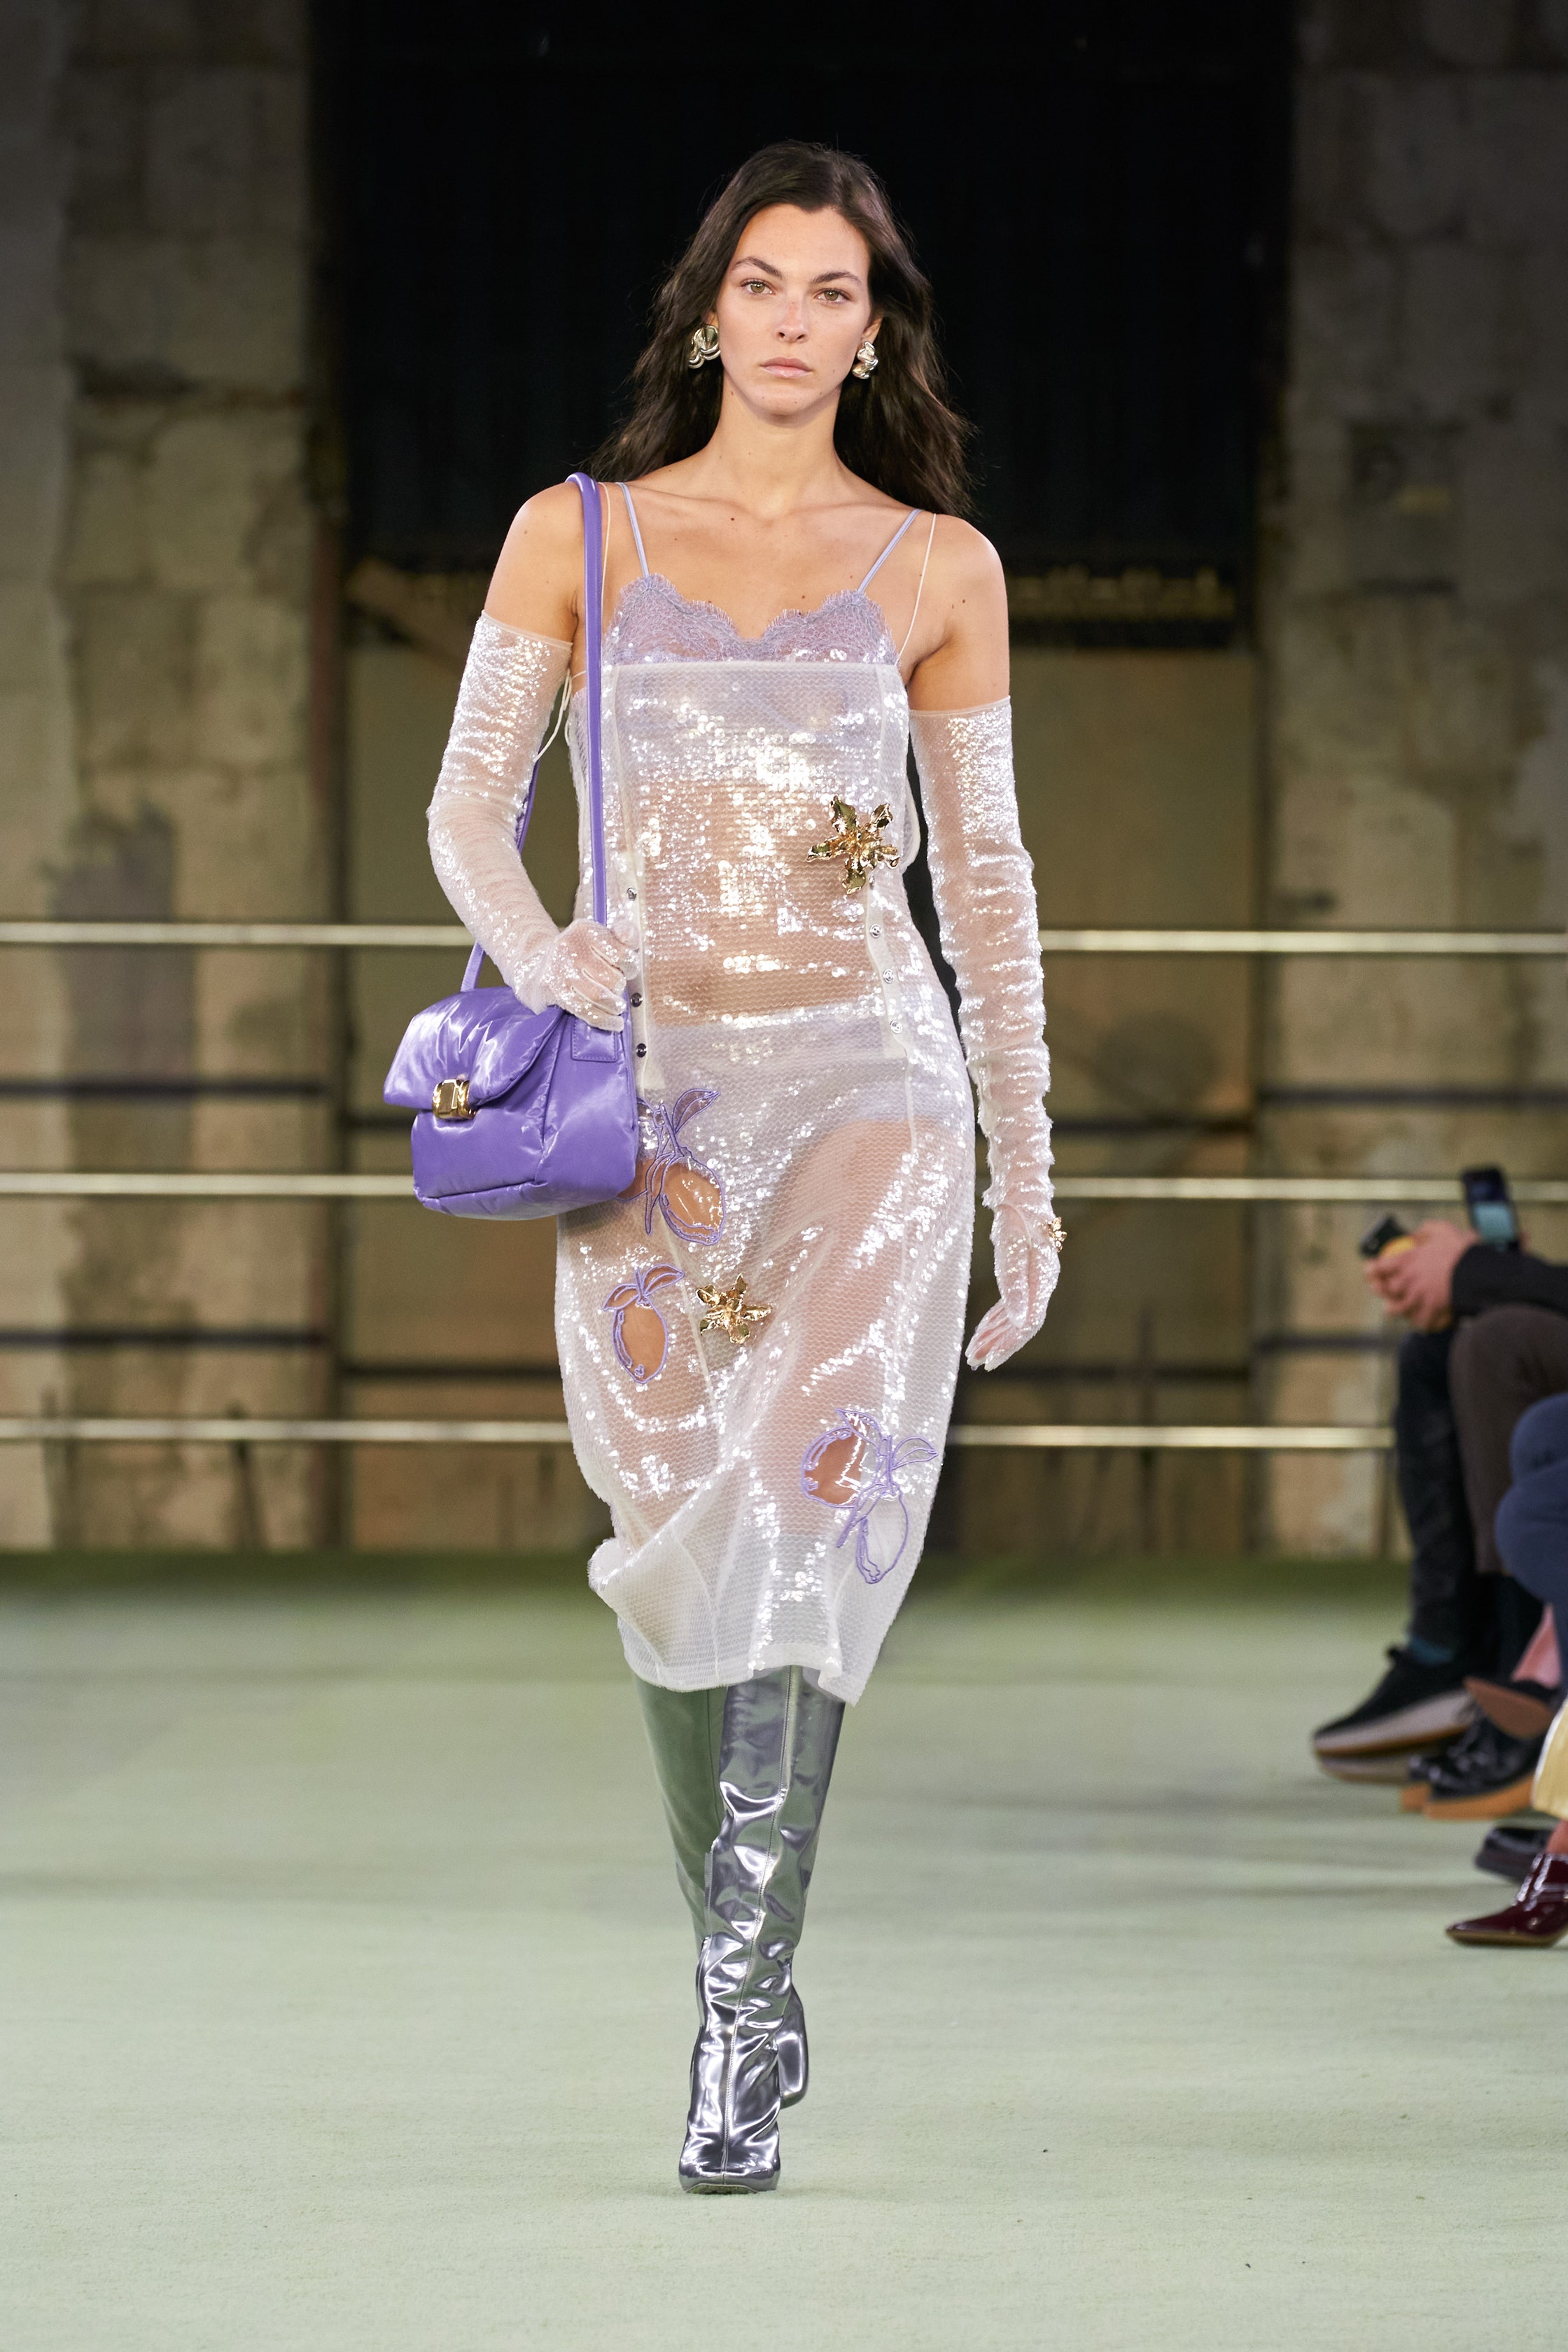 Out of this world: Best of Milan Fashion Week 2022